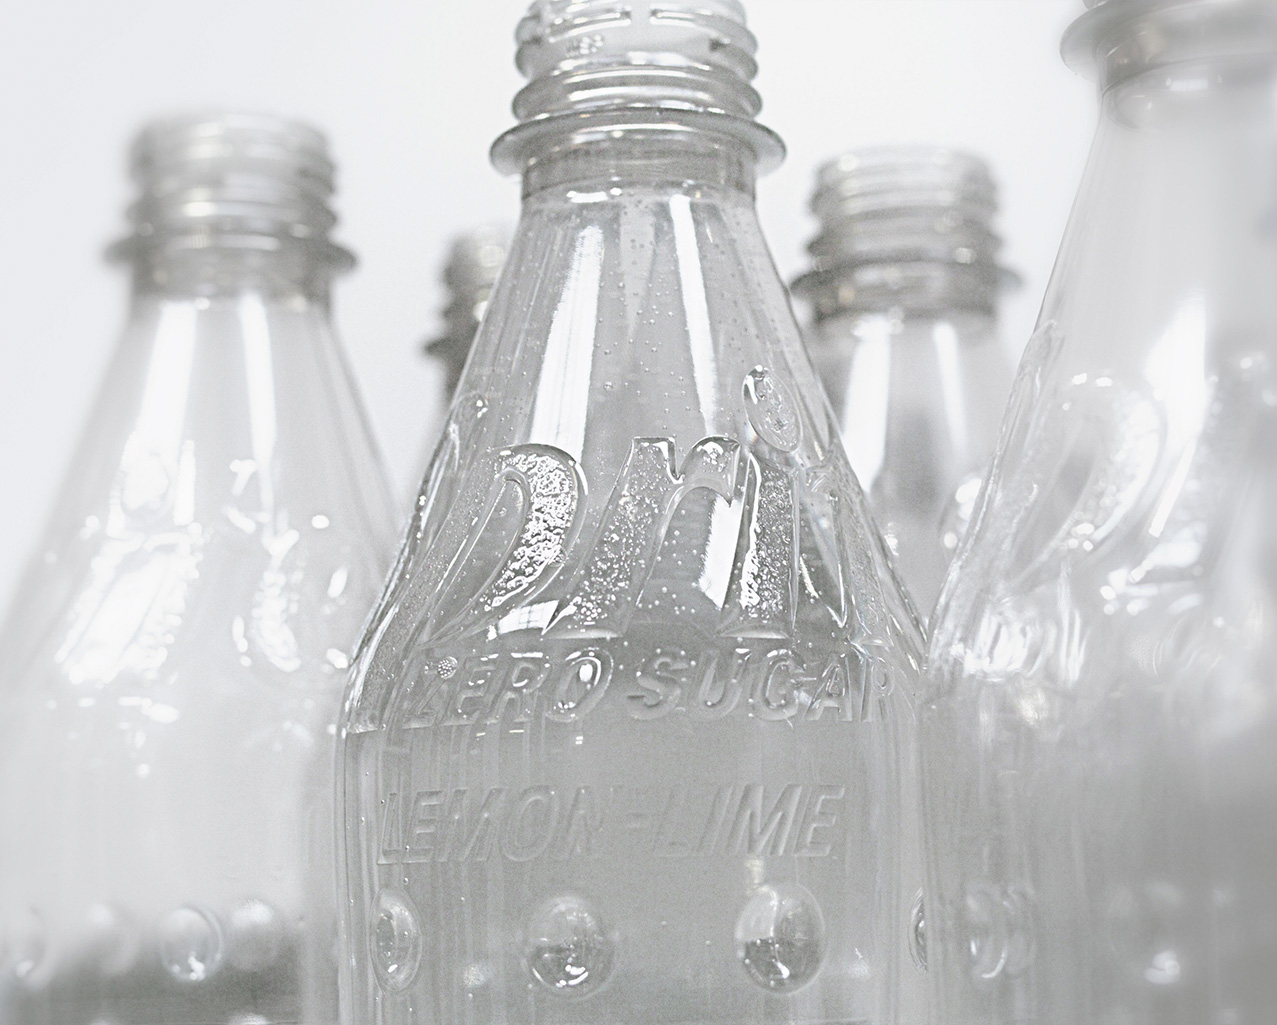 Label Less Sprite Bottle. Coca-Cola is trialing label-less packaging for its 500ml Sprite and Sprite Zero on-the-go bottles in the UK.